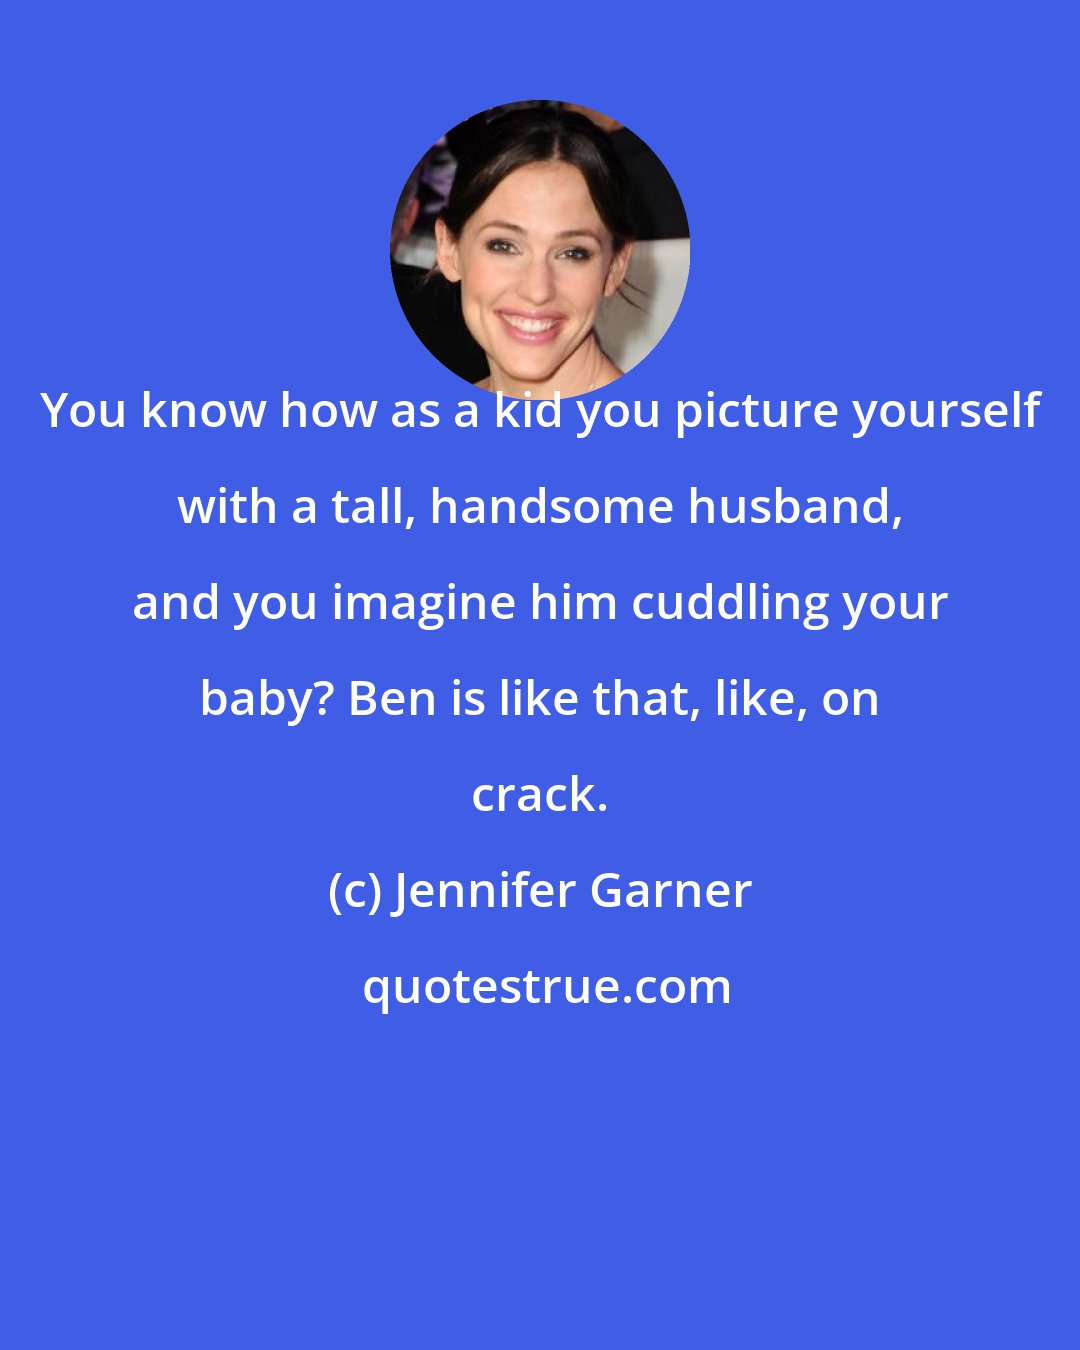 Jennifer Garner: You know how as a kid you picture yourself with a tall, handsome husband, and you imagine him cuddling your baby? Ben is like that, like, on crack.